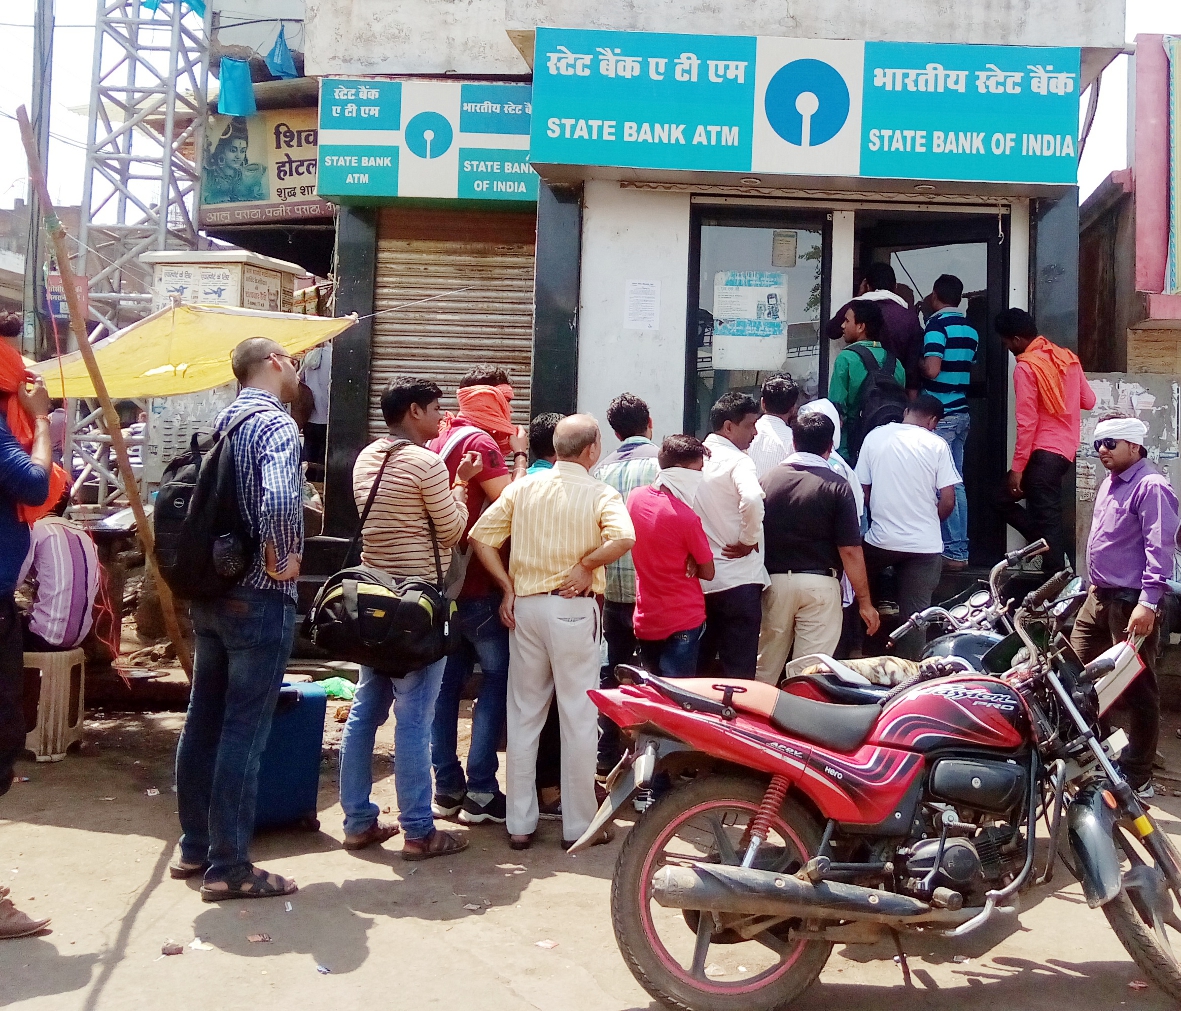 No money in banks, atms also closed